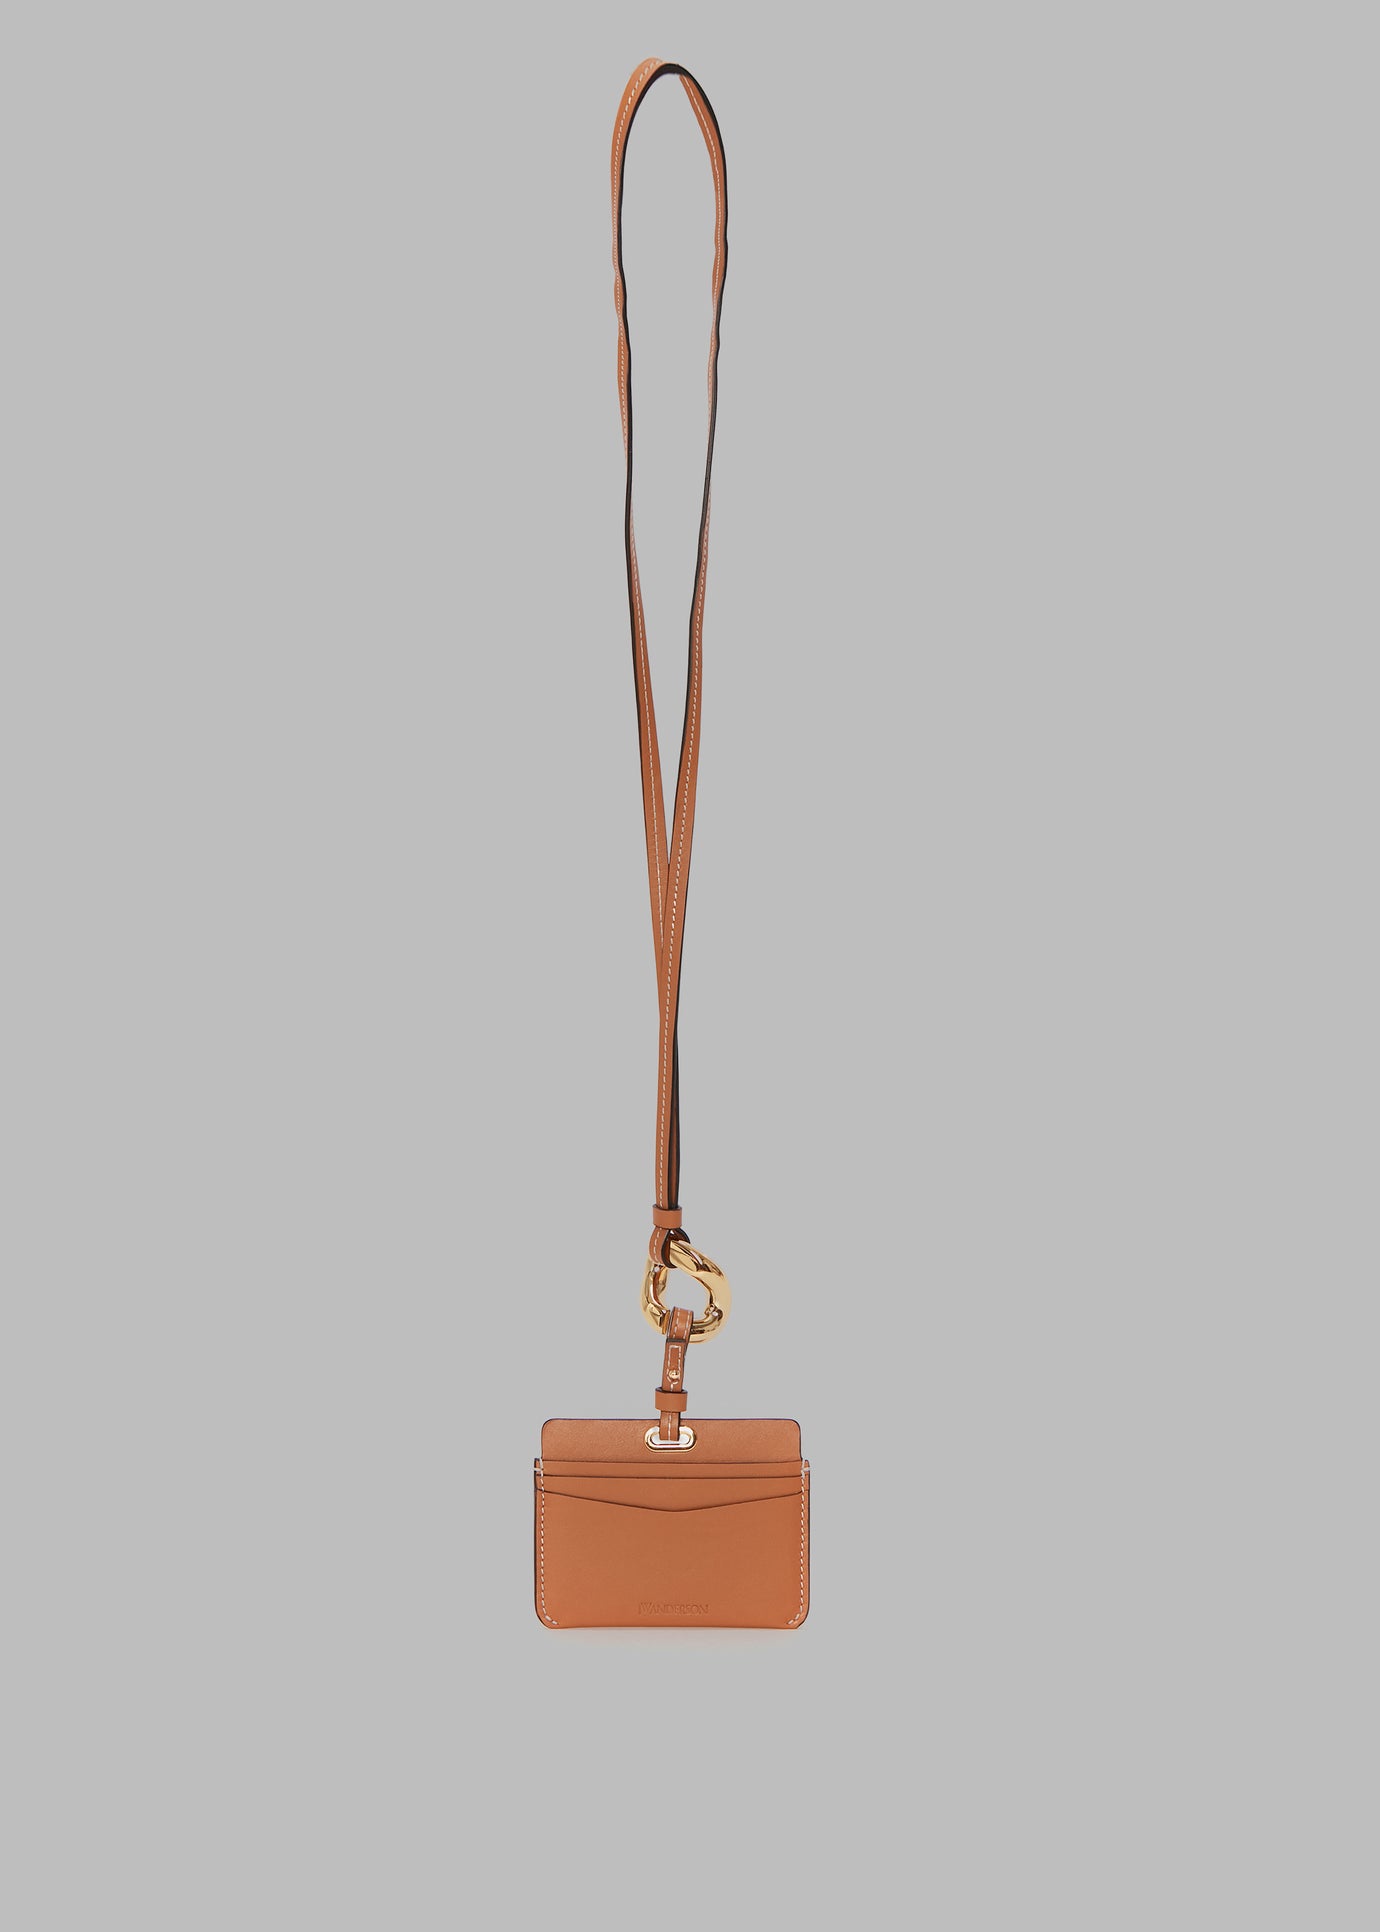 JW Anderson Cardholder with Chain Link Strap - Pecan